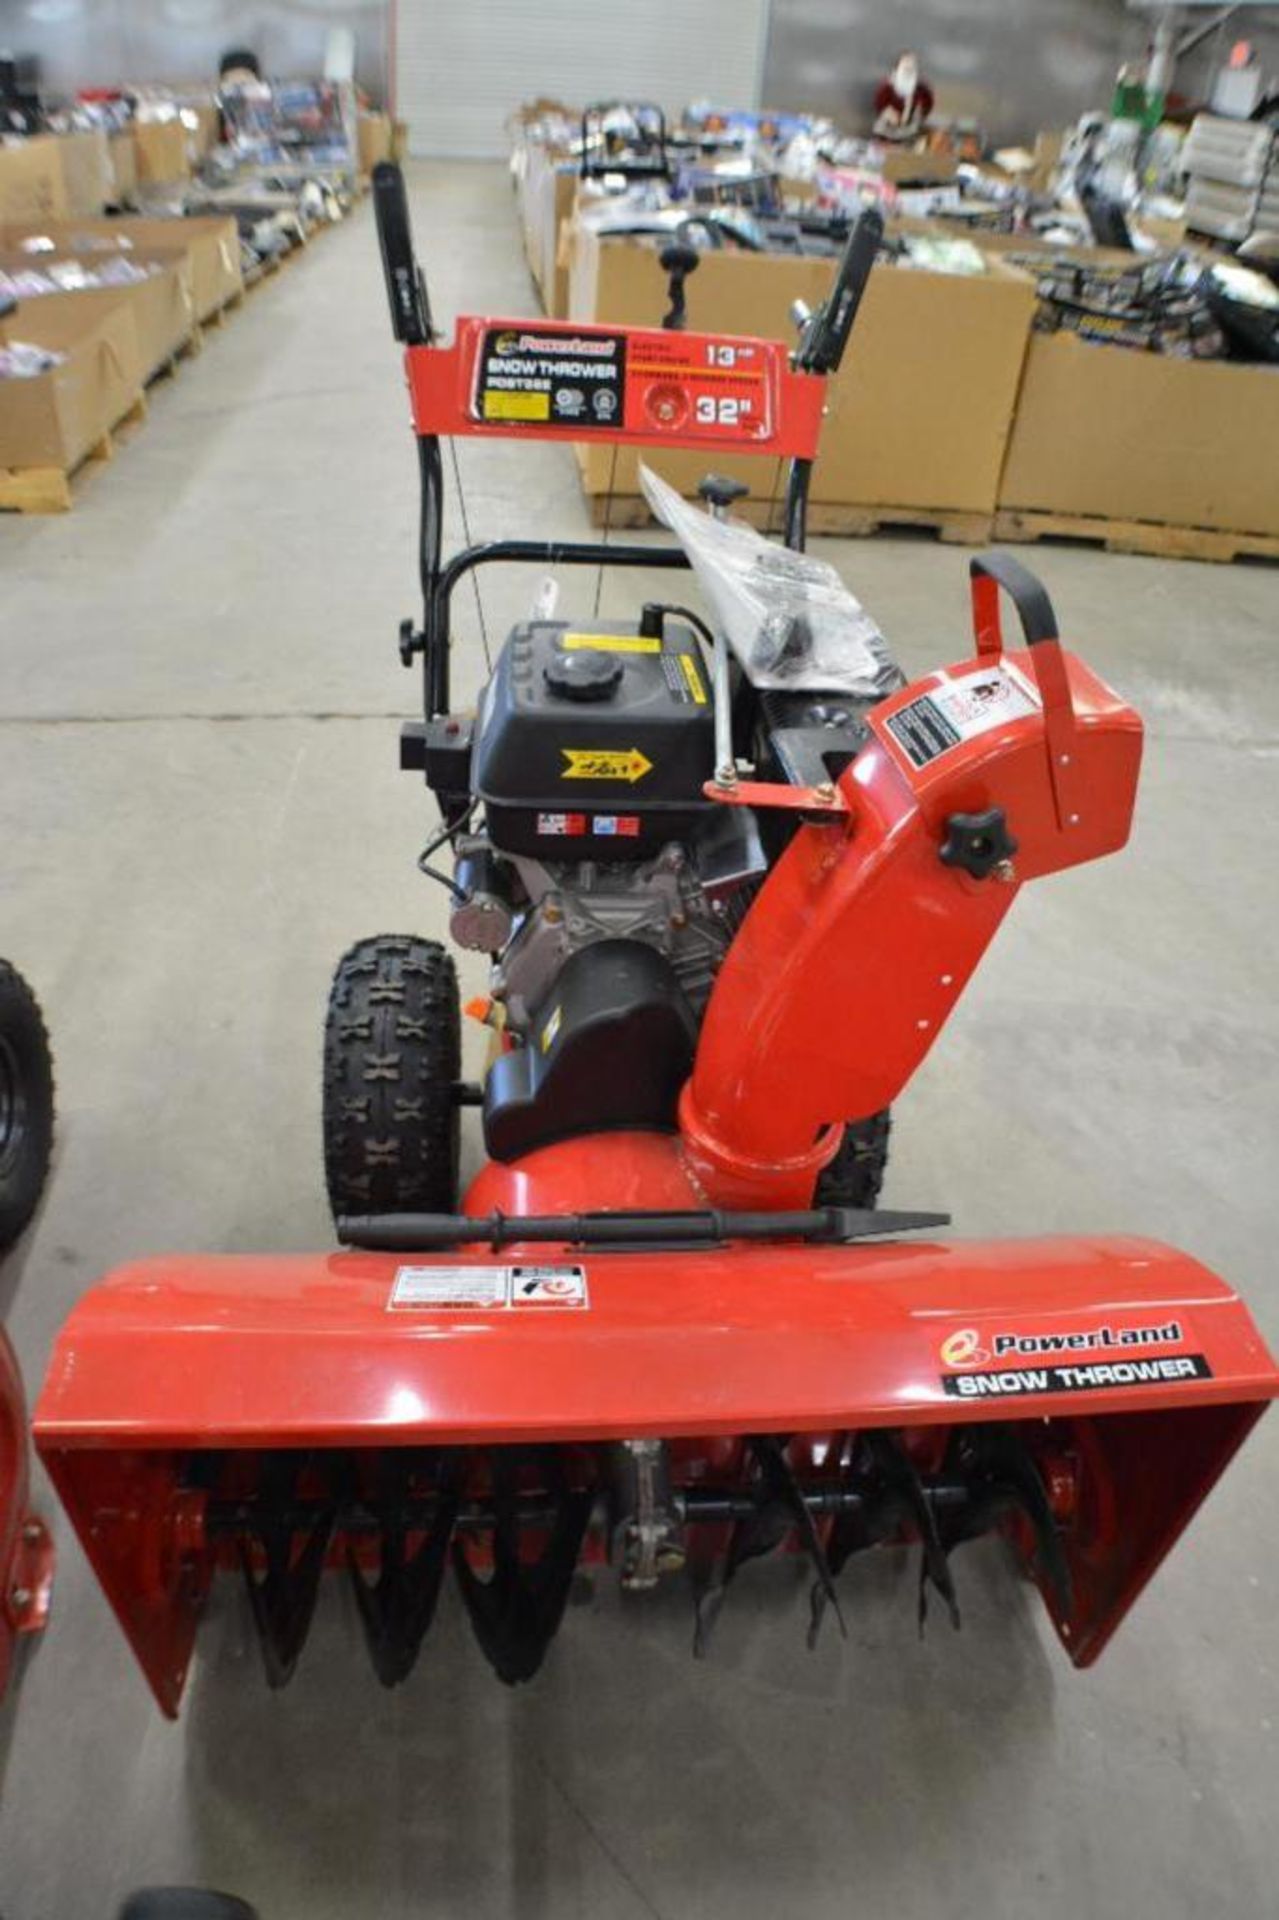 Snow Thrower 32in. 13HP with electric Start Engine 4 Stroke by Powerland - Image 2 of 8